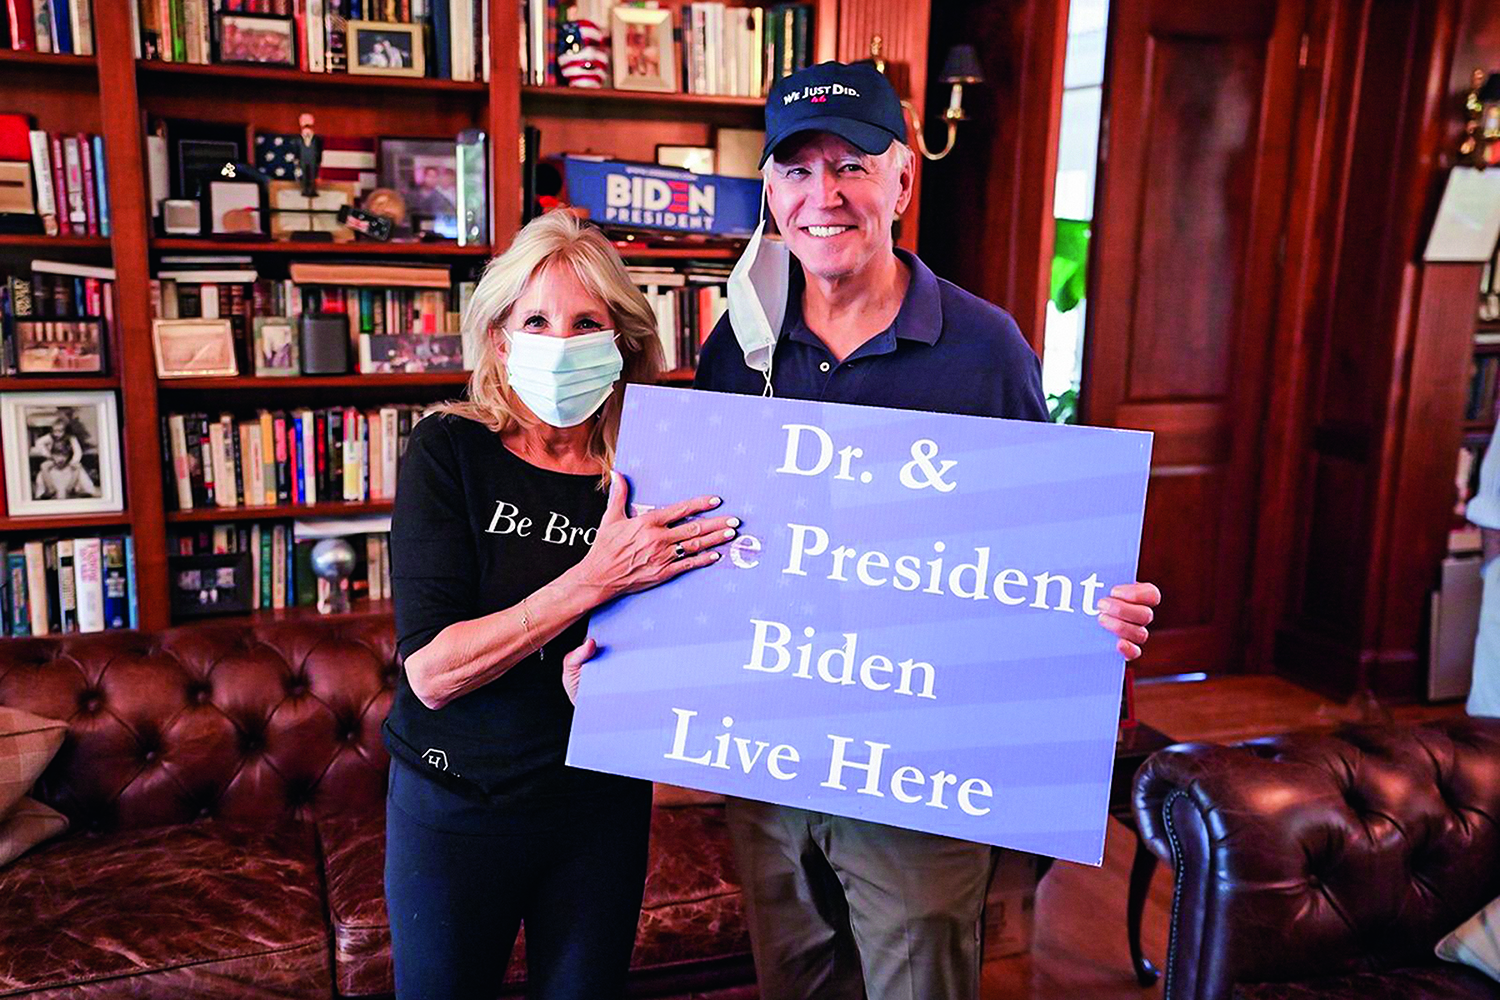 Extra Noting - Doctor Jill and her husband, Biden: Promise to Order at White House -